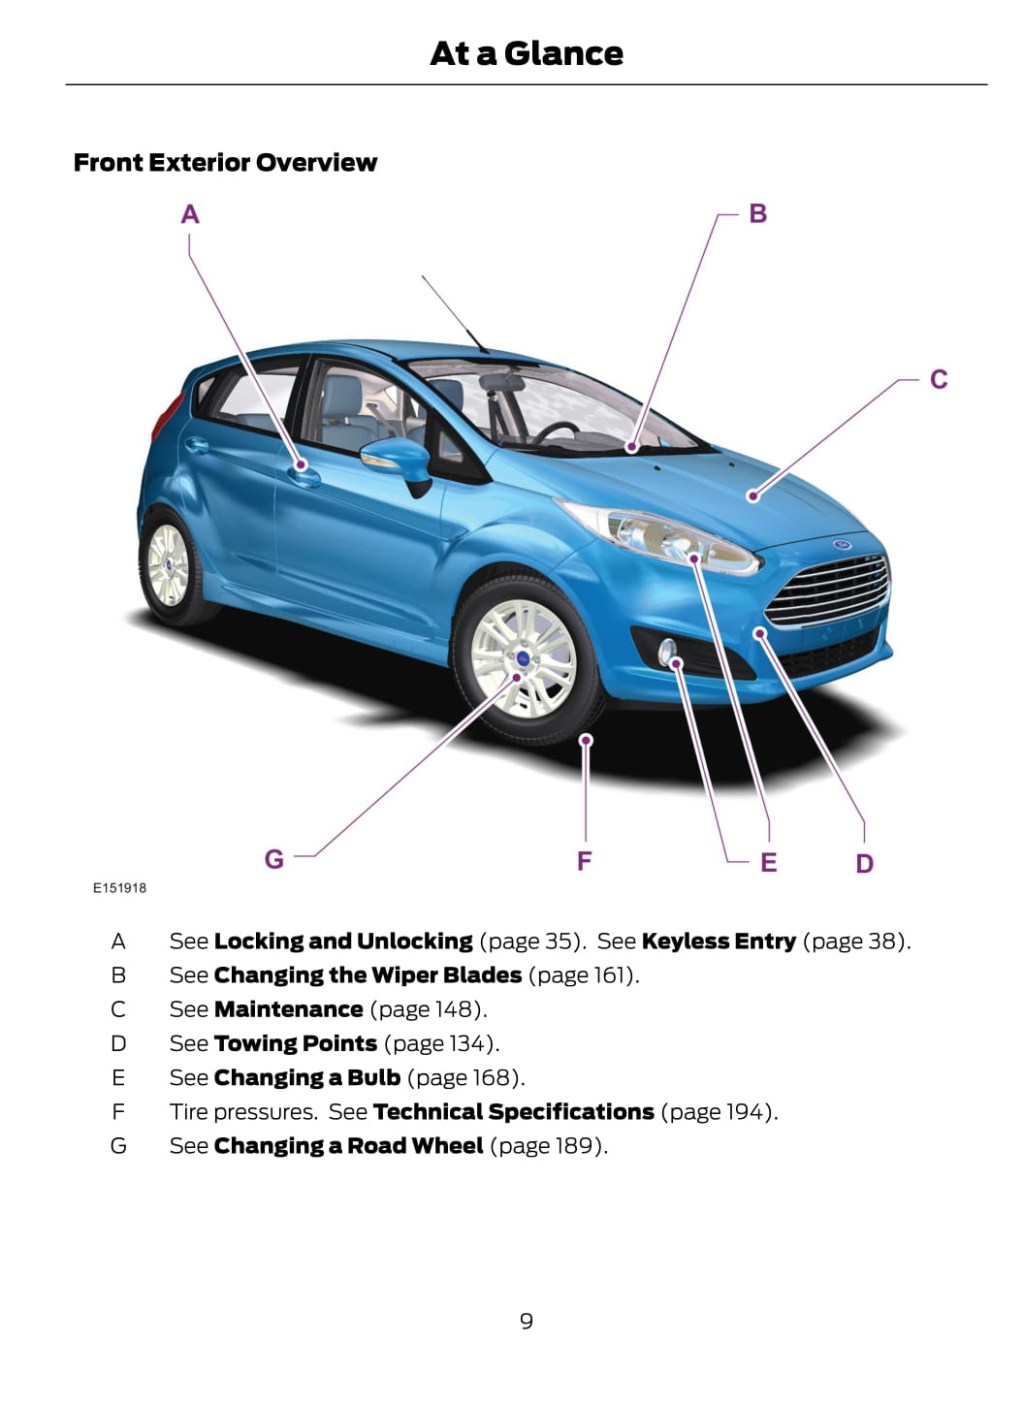 Picture of: – Ford Fiesta Owner’s Manual  English – Carmanuals